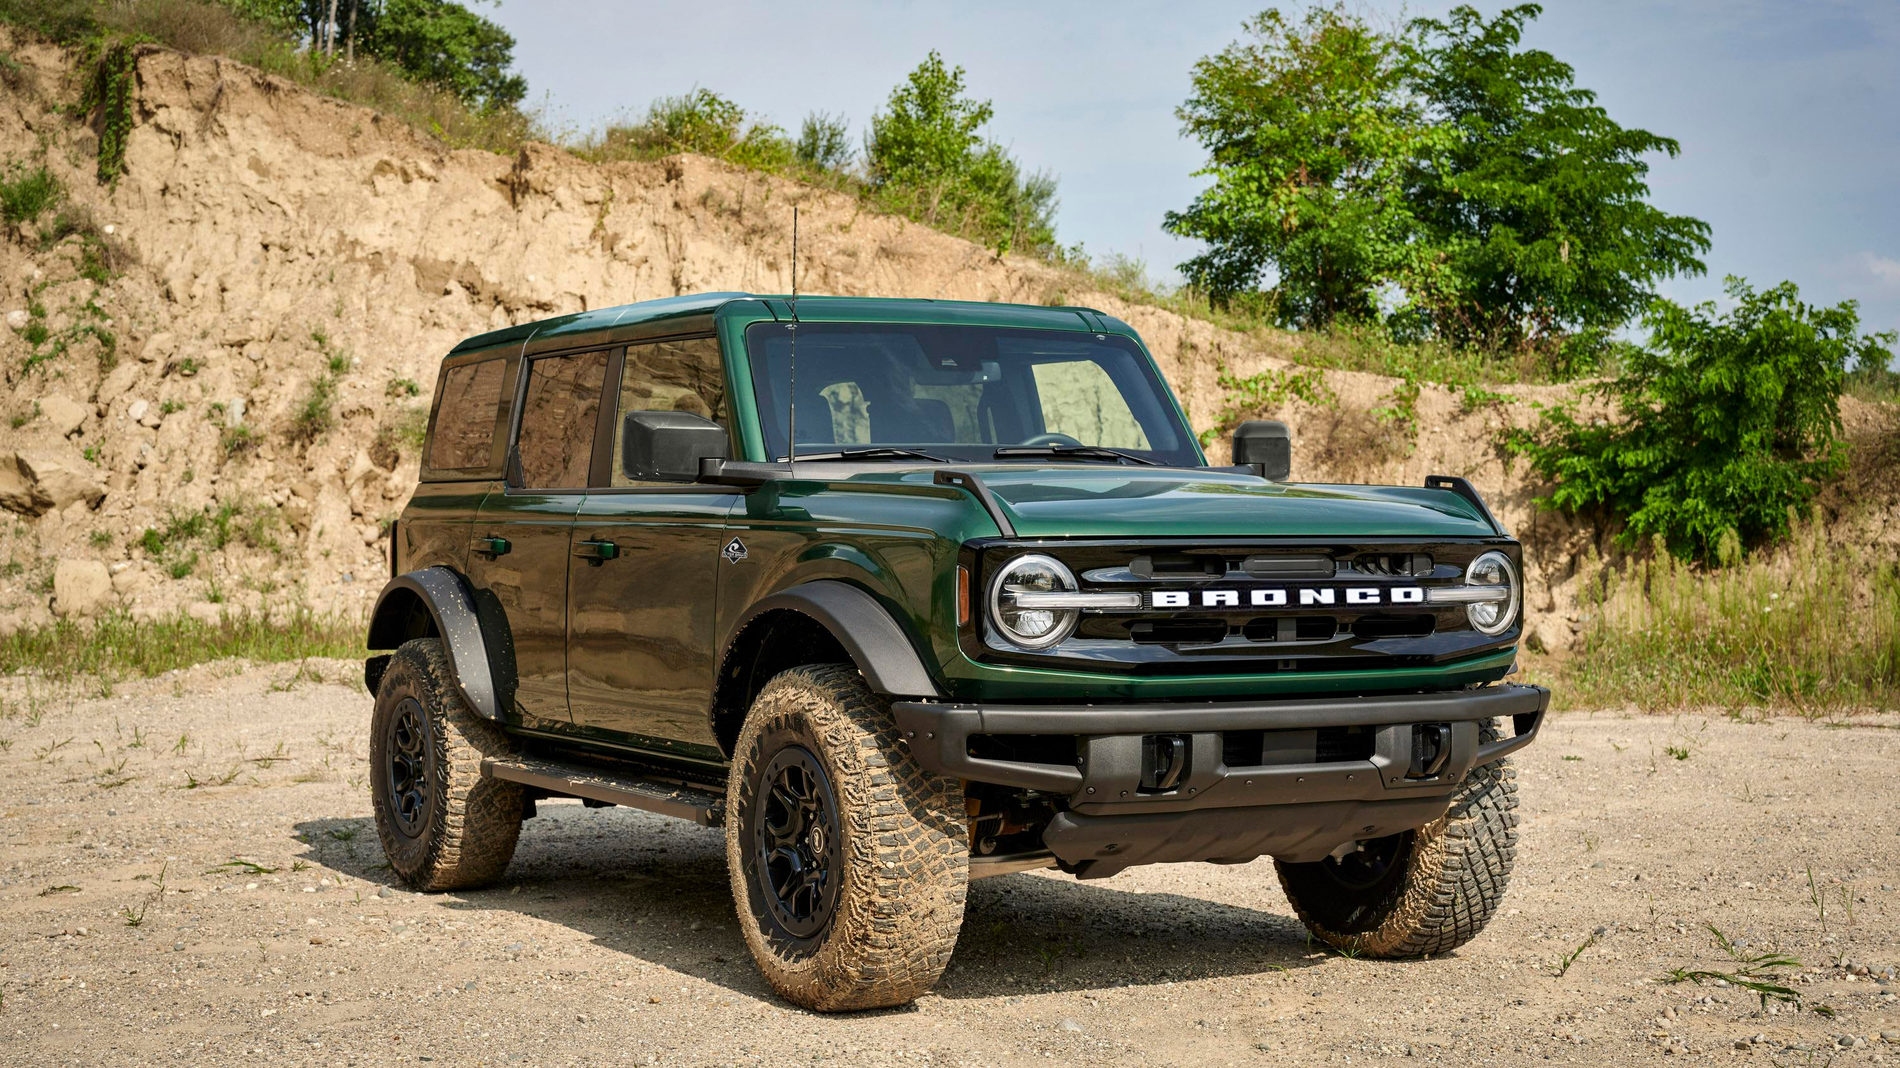 Ford Bronco Eruption Green Bronco Sasquatch rendered with: COLOR MATCHED Roof, Fender Flares & Black Beauty Rings 51633988346_3462b14cd2_o